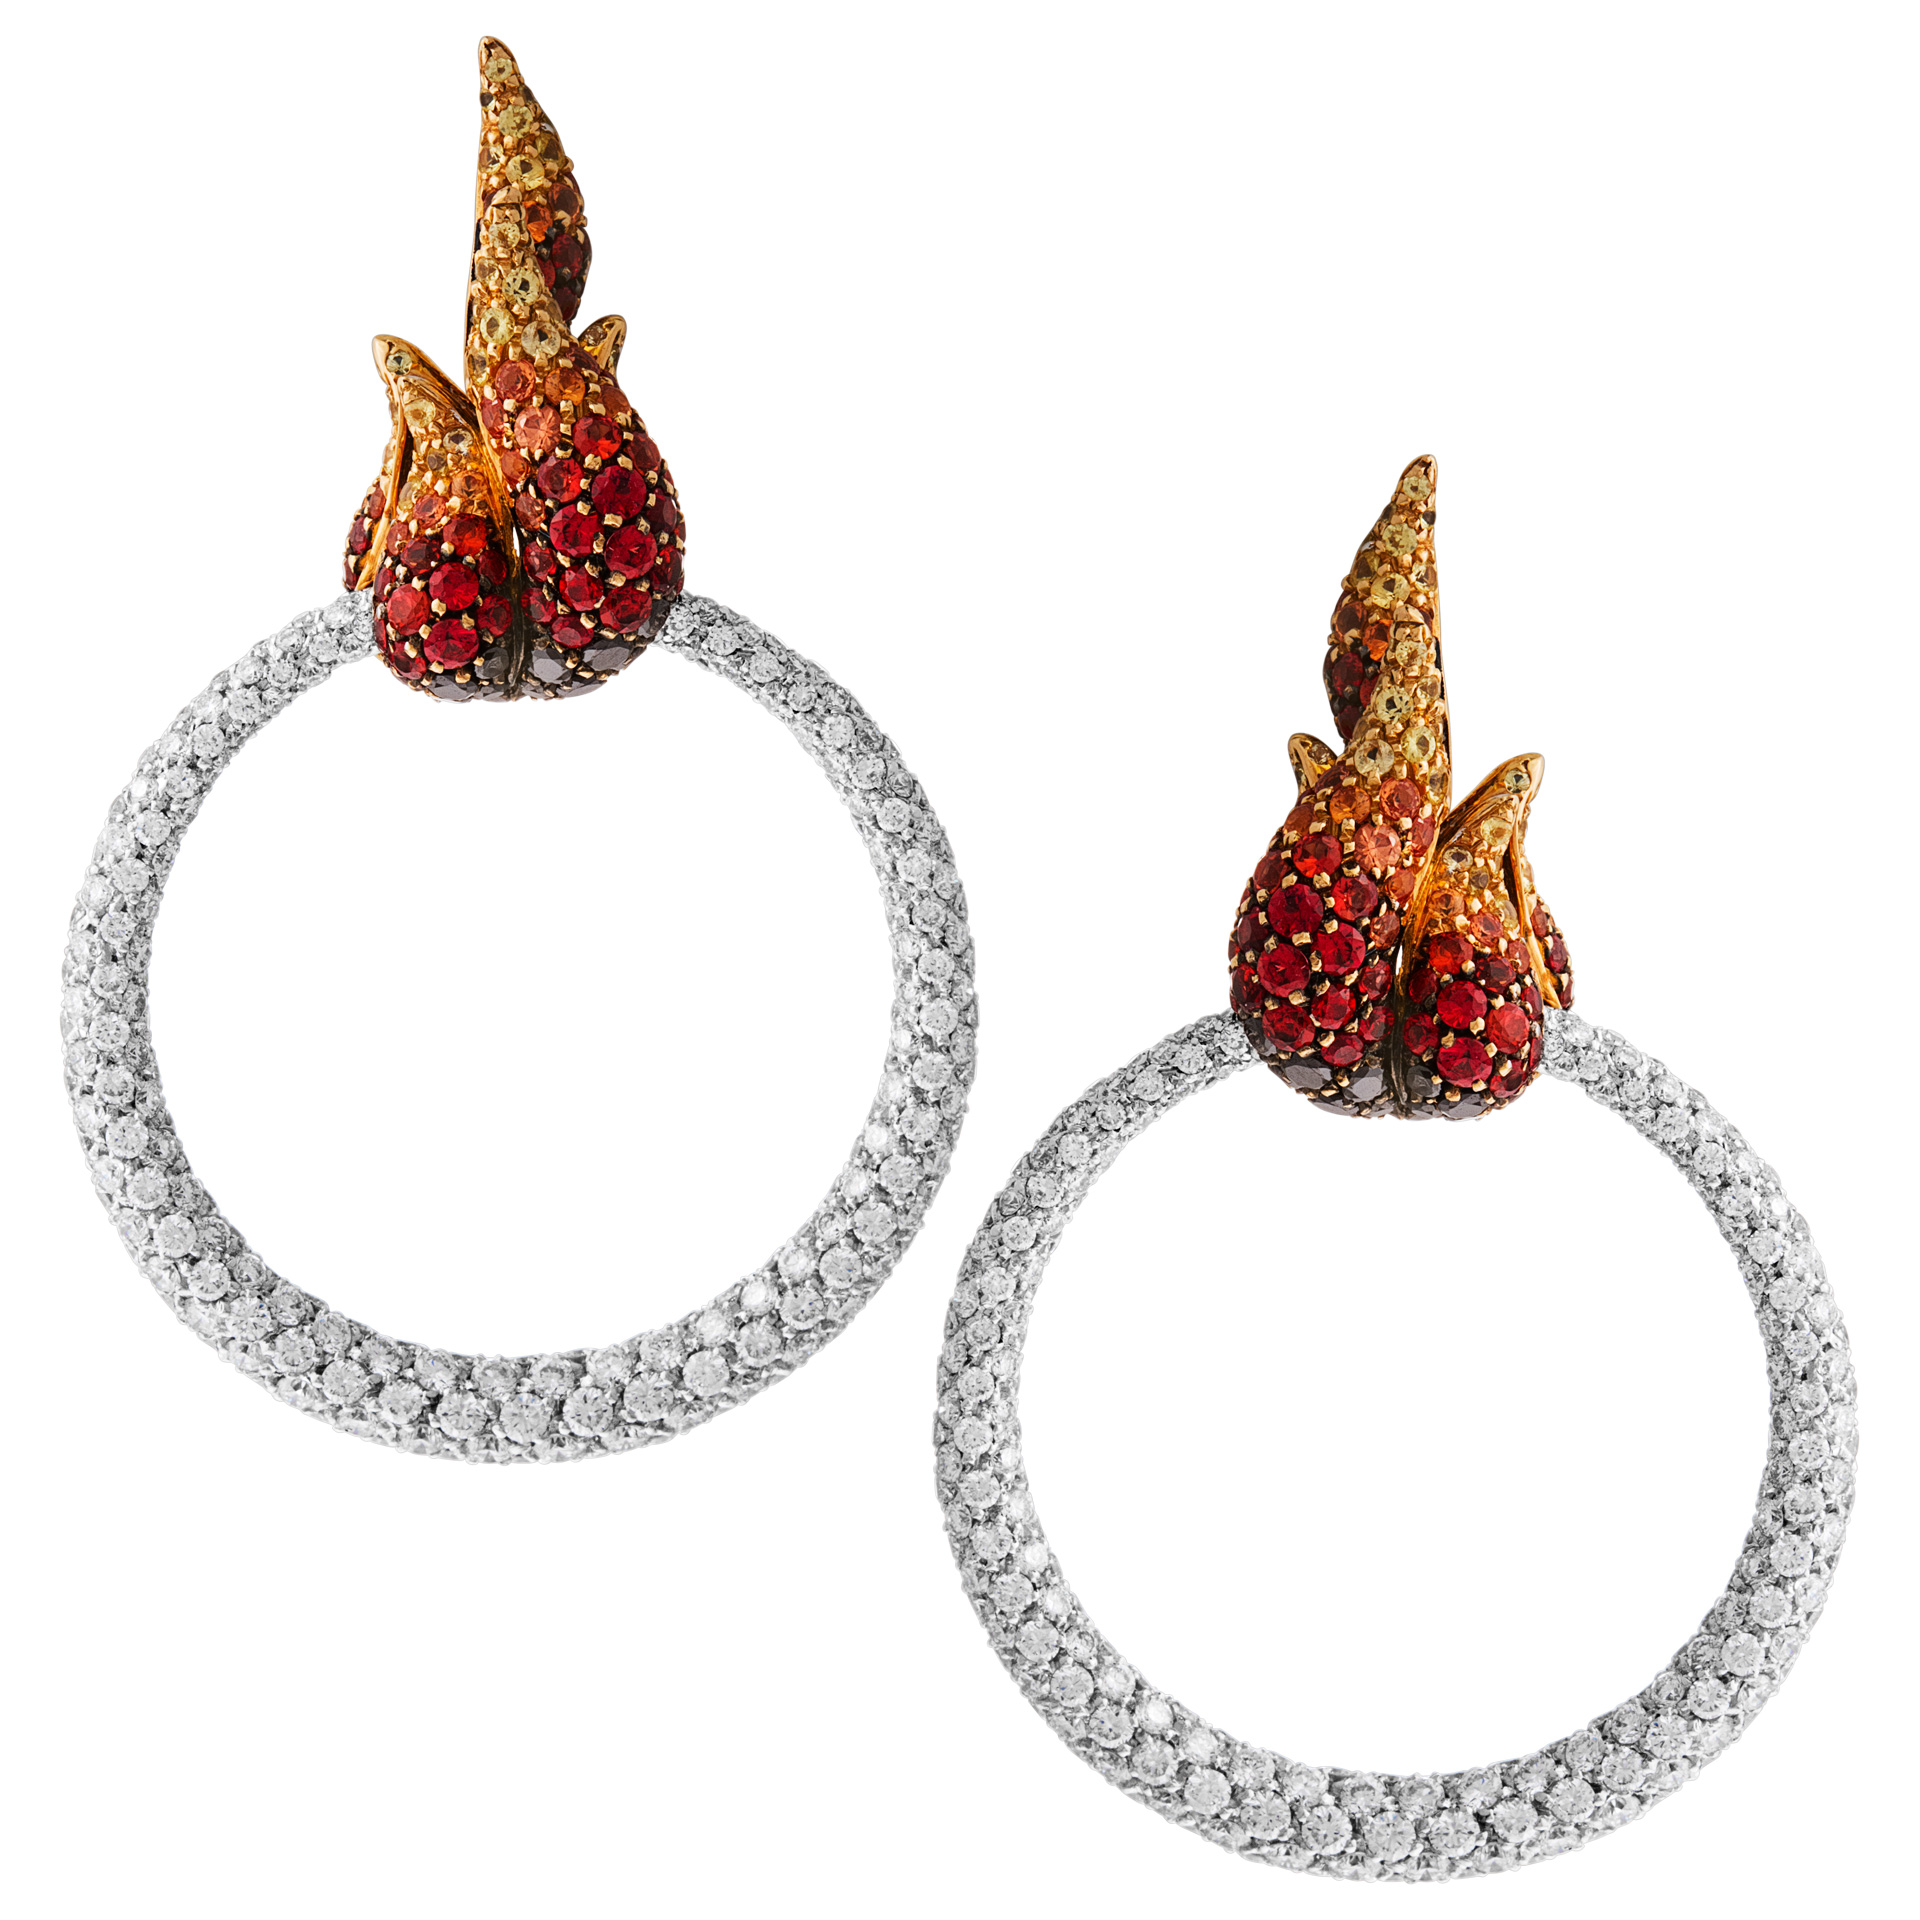 18k white and yellow gold pave diamond hoop earrings with graduating flames in multi color sapphires